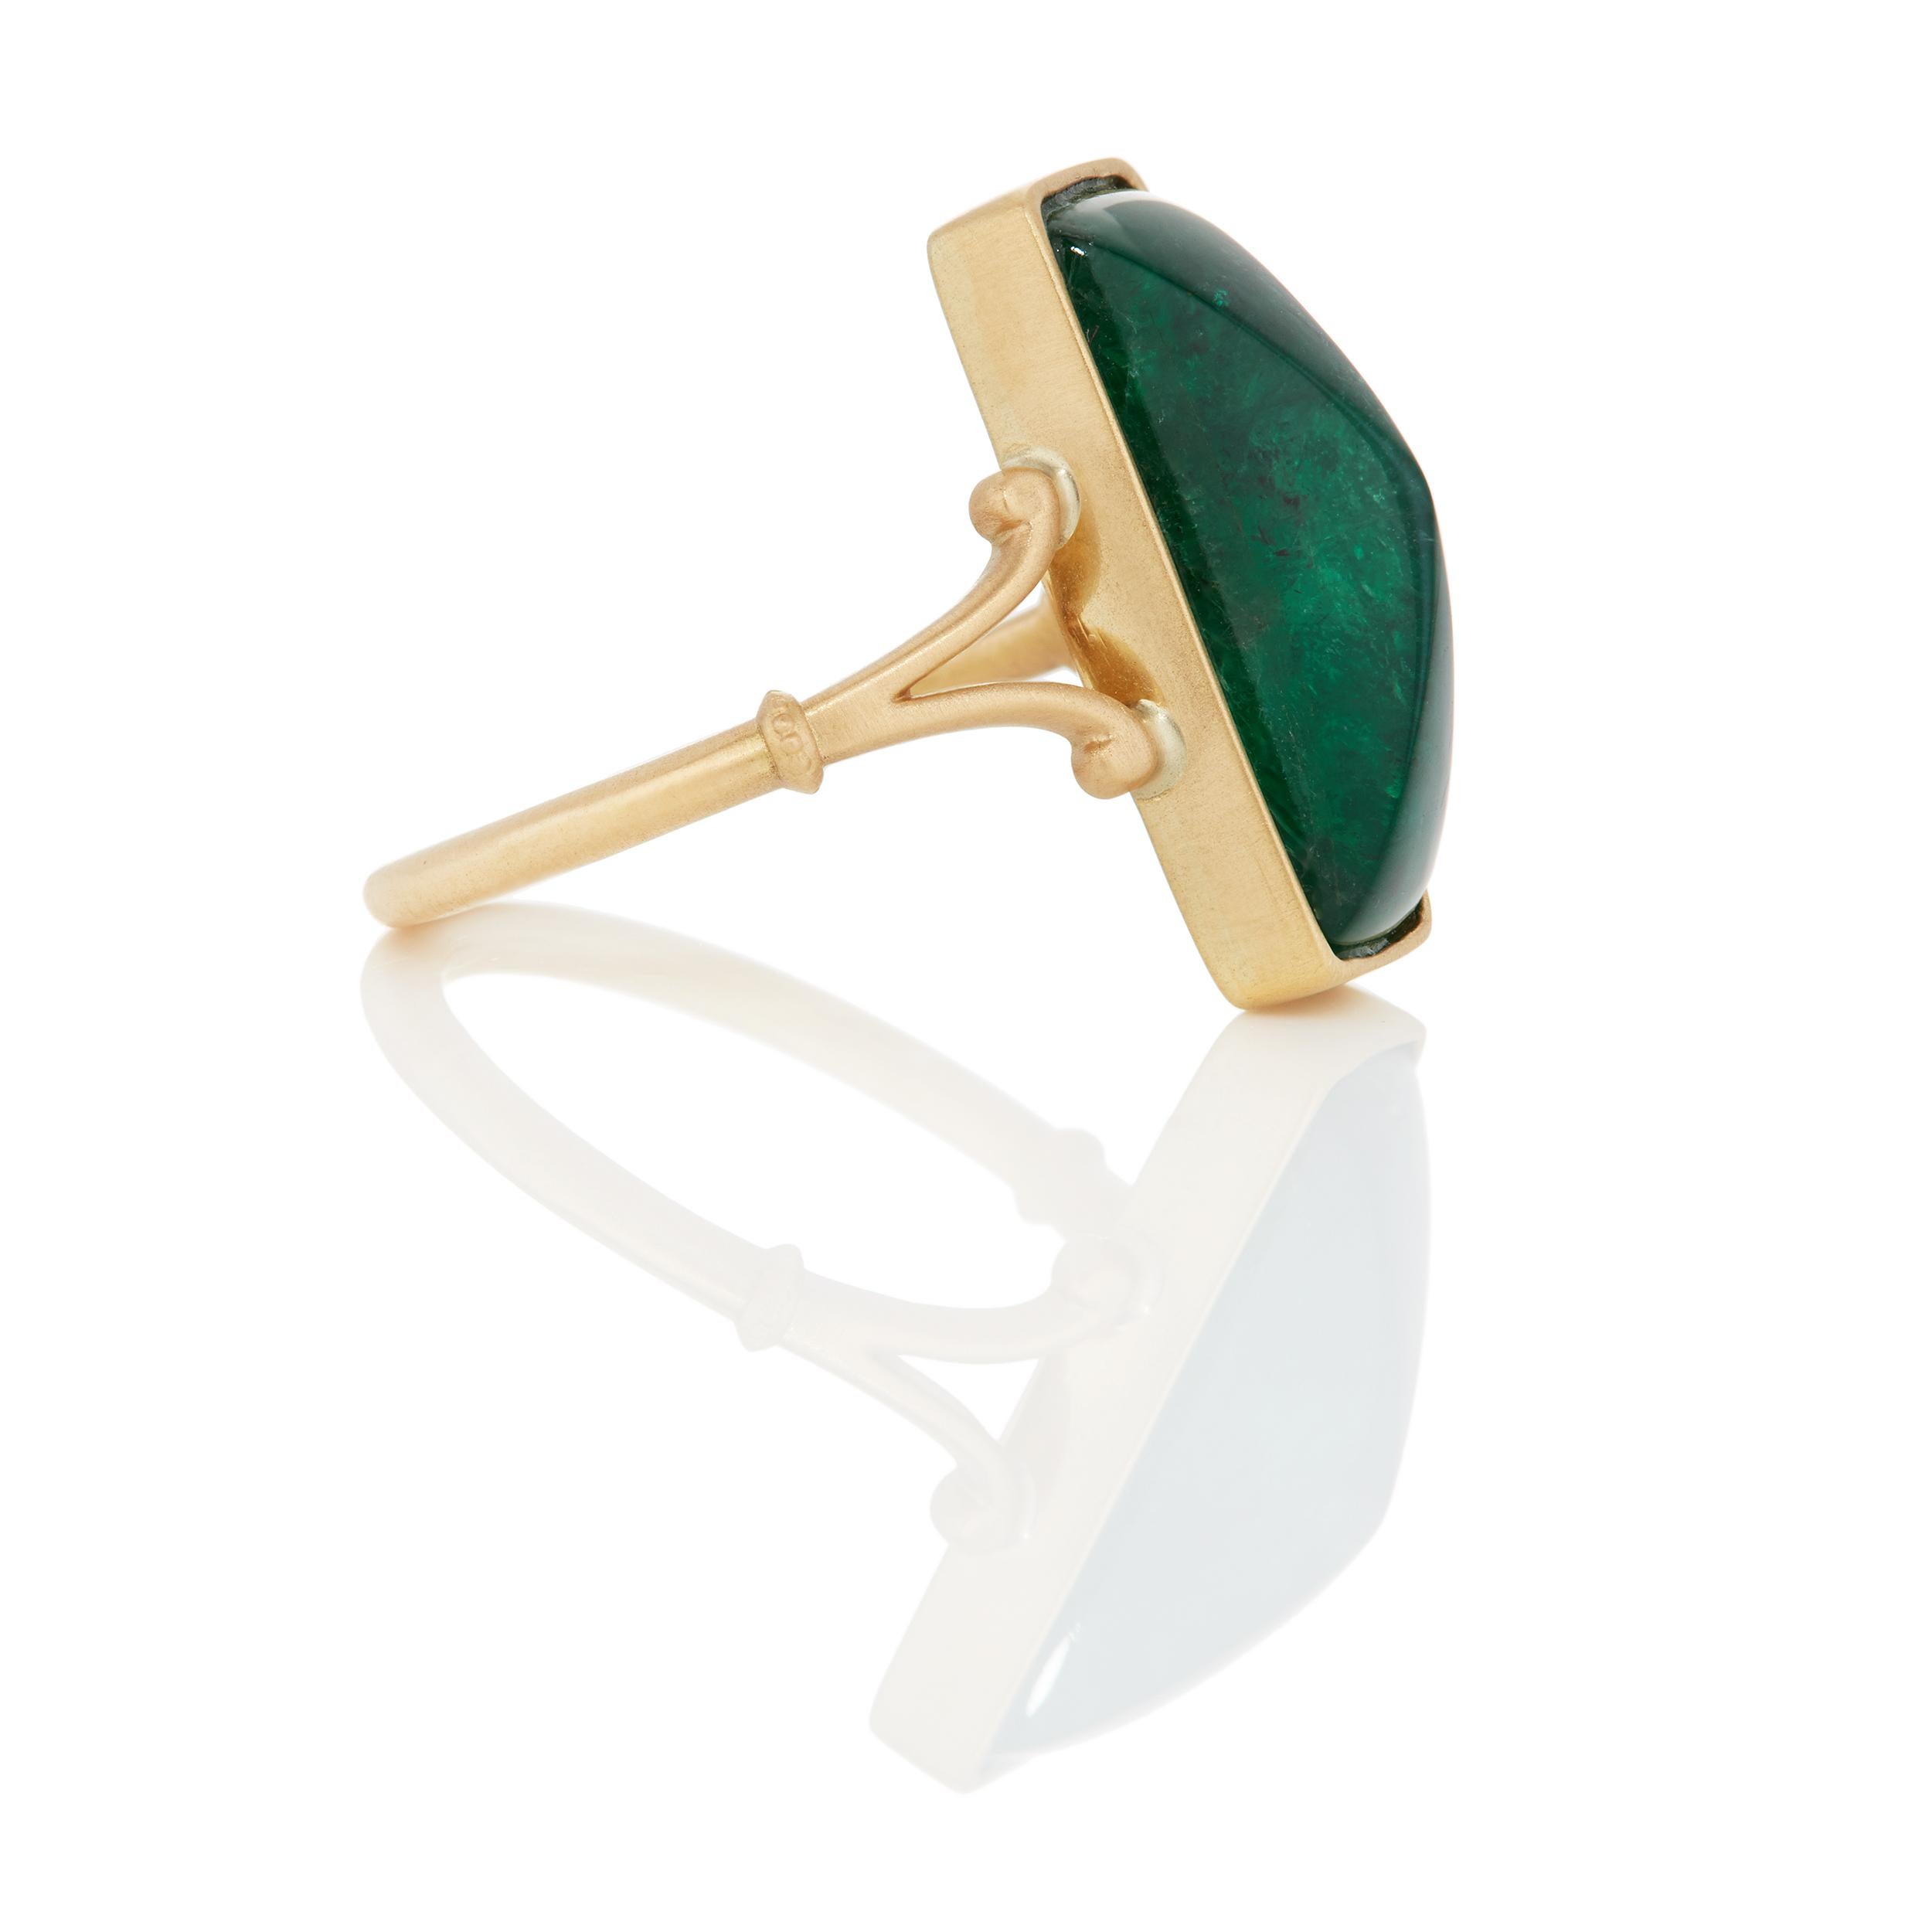 Overall Description:

Sugarloaf Cabochon Emerald
     •6.60 Carats Zambian
     •17 x 7.7 x 6.6 mm

Ring Size: 6.5

Measurements

Finger: 17.9 mm
Length: 24.5 mm 
Width: 19.7 mm

Weight: 5.2 grams